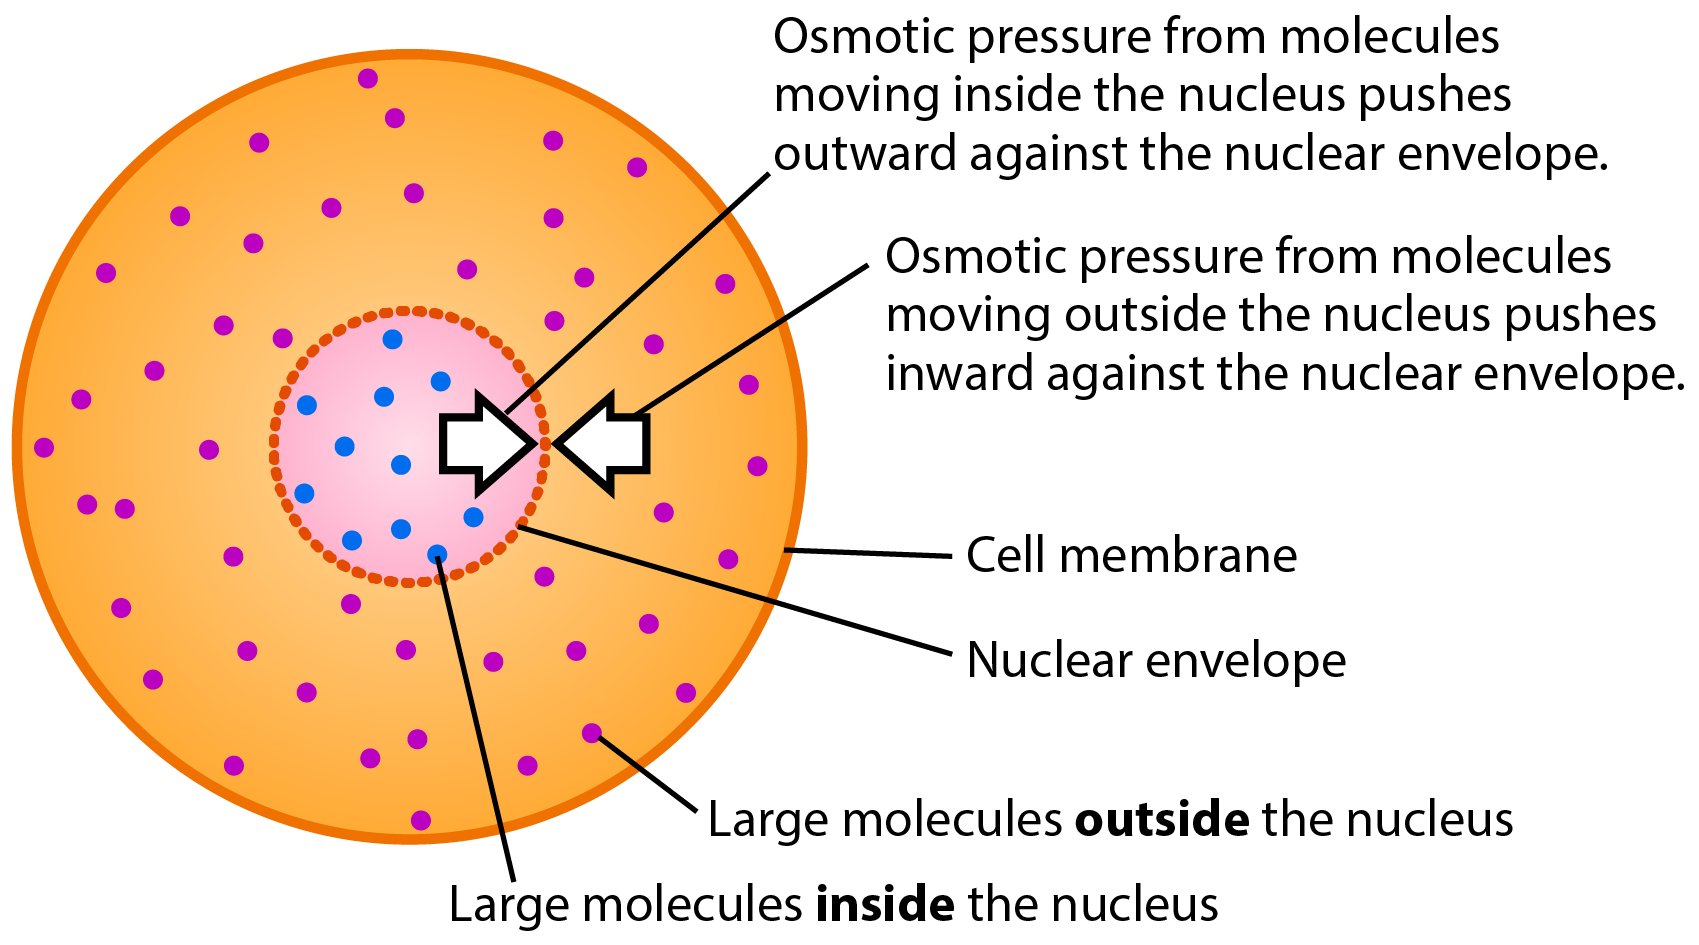 Cell with large particles inside and outside the nucleus. Arrows show where pressure from the molecules outside the nucleus is pushing inward against the nuclear envelope, and where pressure from the molecules inside the nucleus is pushing outward against the nuclear envelope.